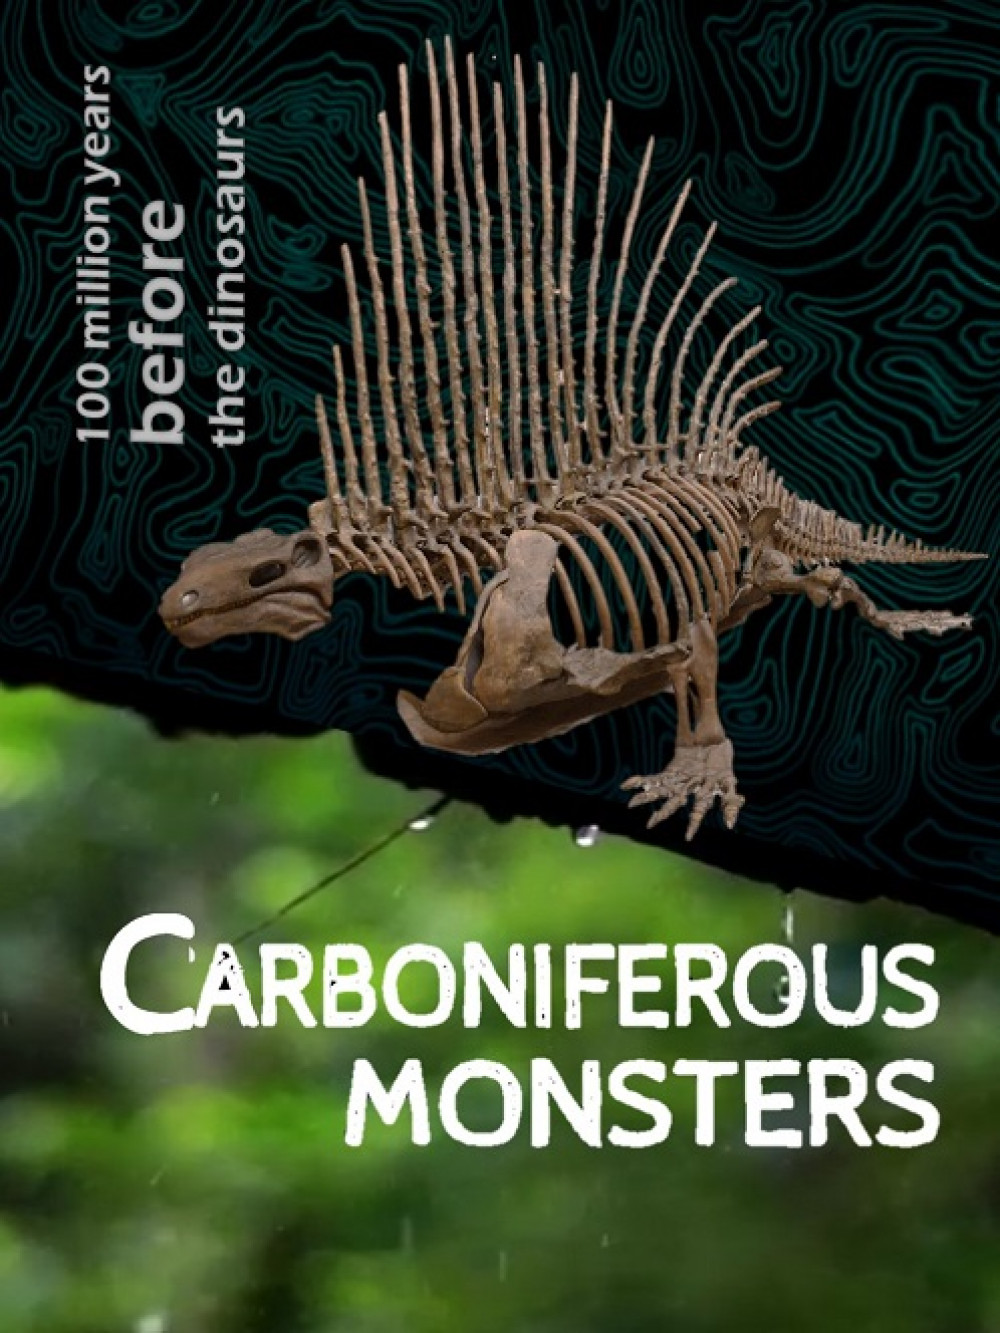 Carboniferous Monsters: 100 million years before the Dinosaurs